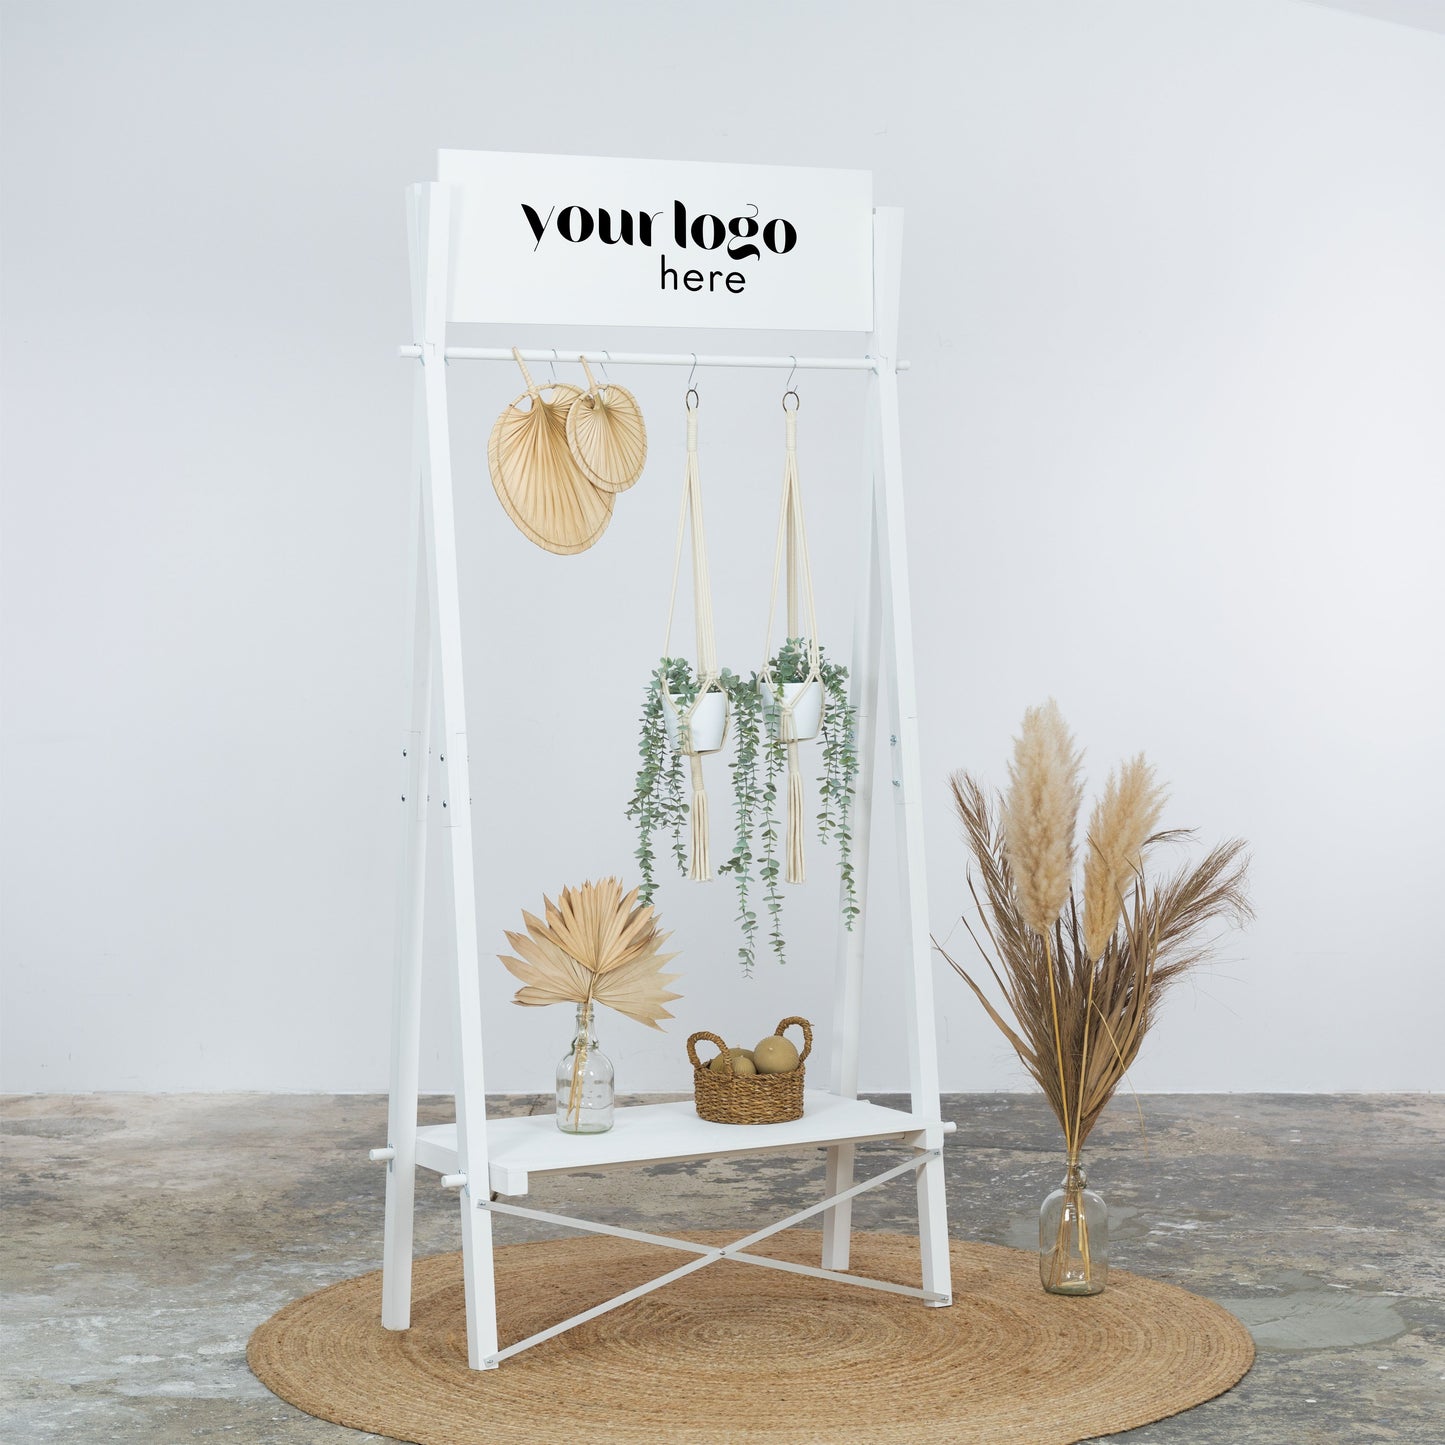 Portable wooden garment rack VR-02-WT with custom logo board  | pop up store